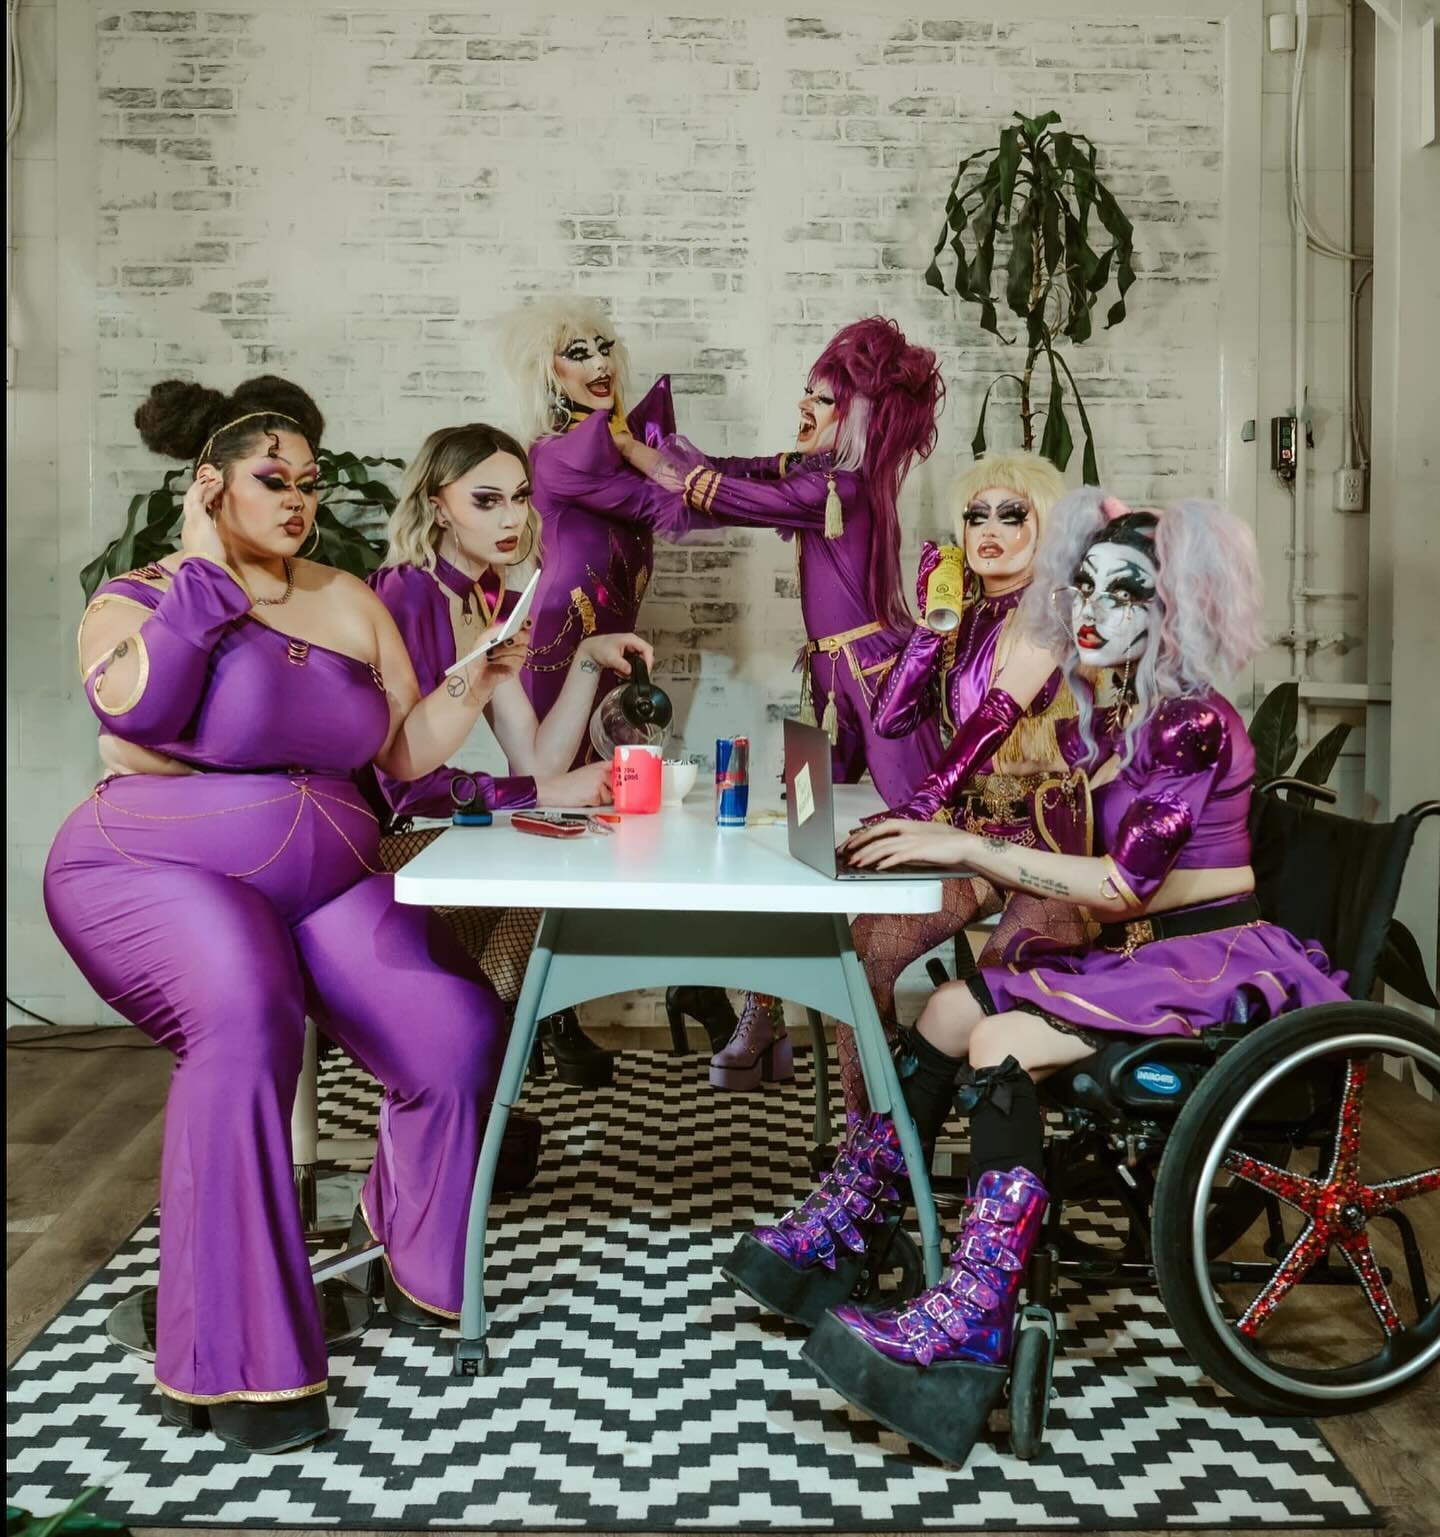 ASPSH is so excited to collaborate with @partyqueensyeg and the @iscwr to host Drag for Every Body, a drag show to kick off our conference on May 30 at @evowonderlounge! All are welcome - conference attendees, presenters, supporters of sexual health 